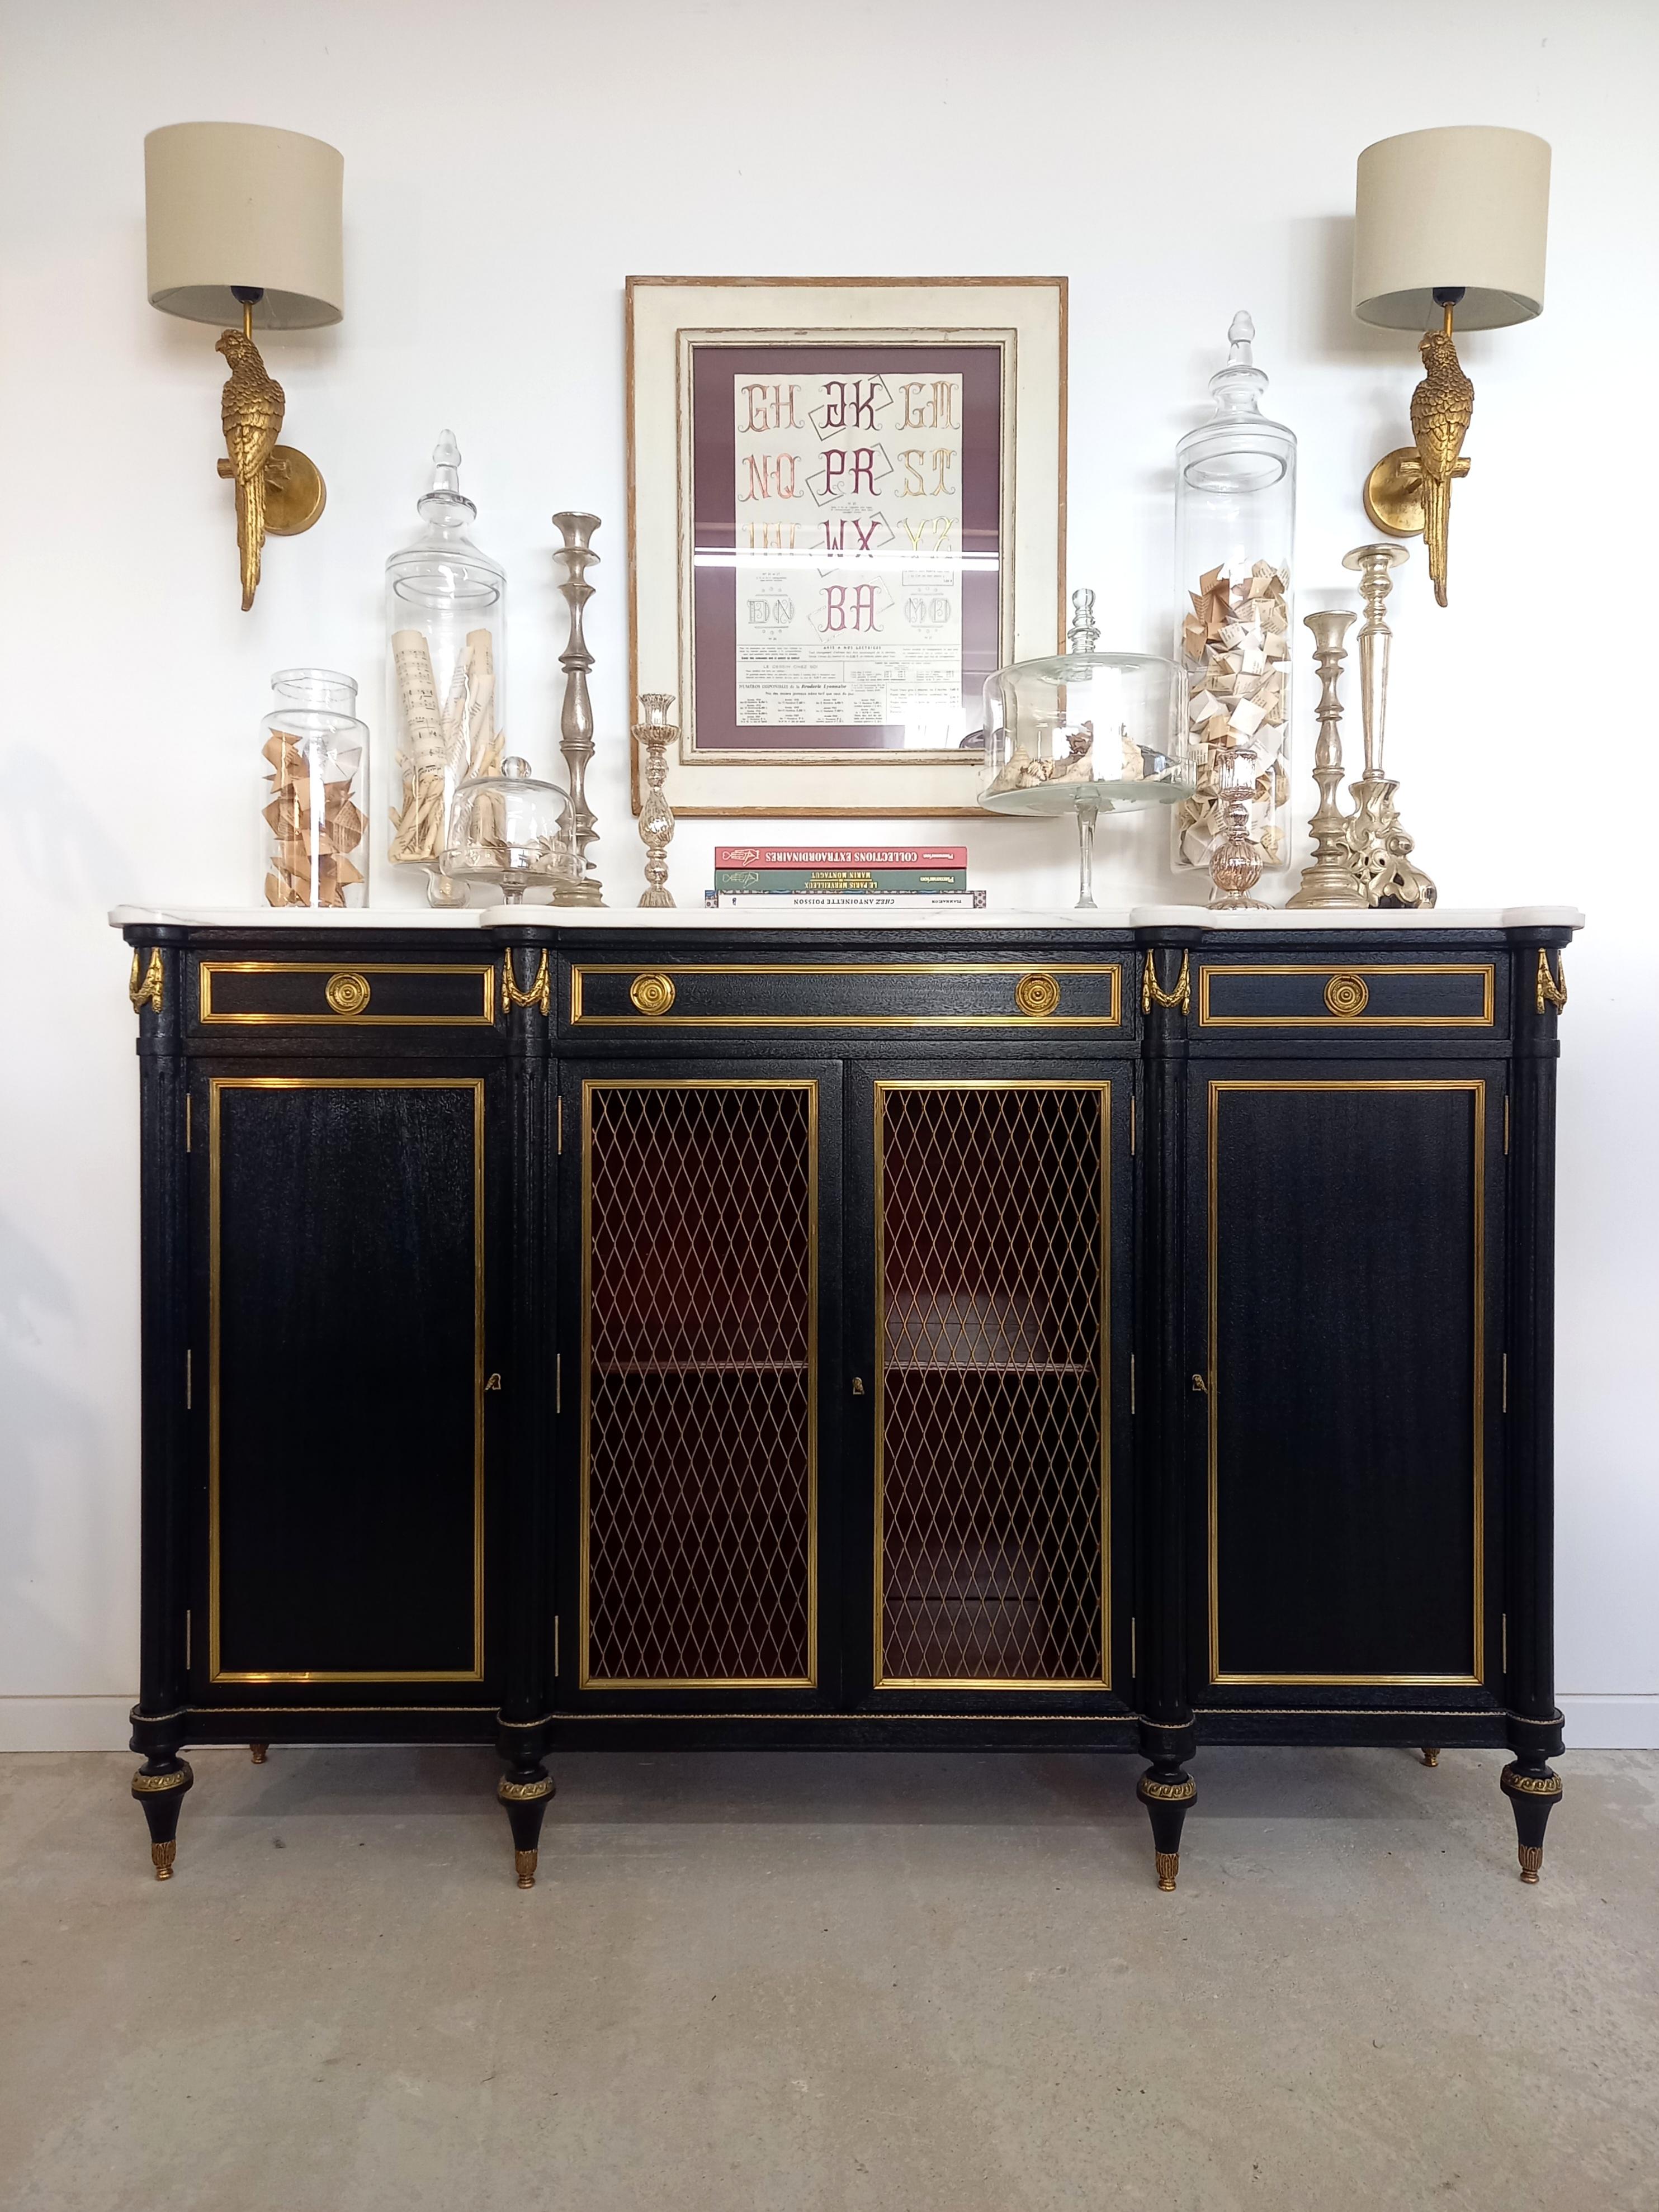 Antique French, Louis XVI style buffet topped with a white marble, fluted legs finished with golden bronze clogs. 
Three dovetailed drawers and four doors with brass details and their keys.
The bronze details all around the piece, are very elegant